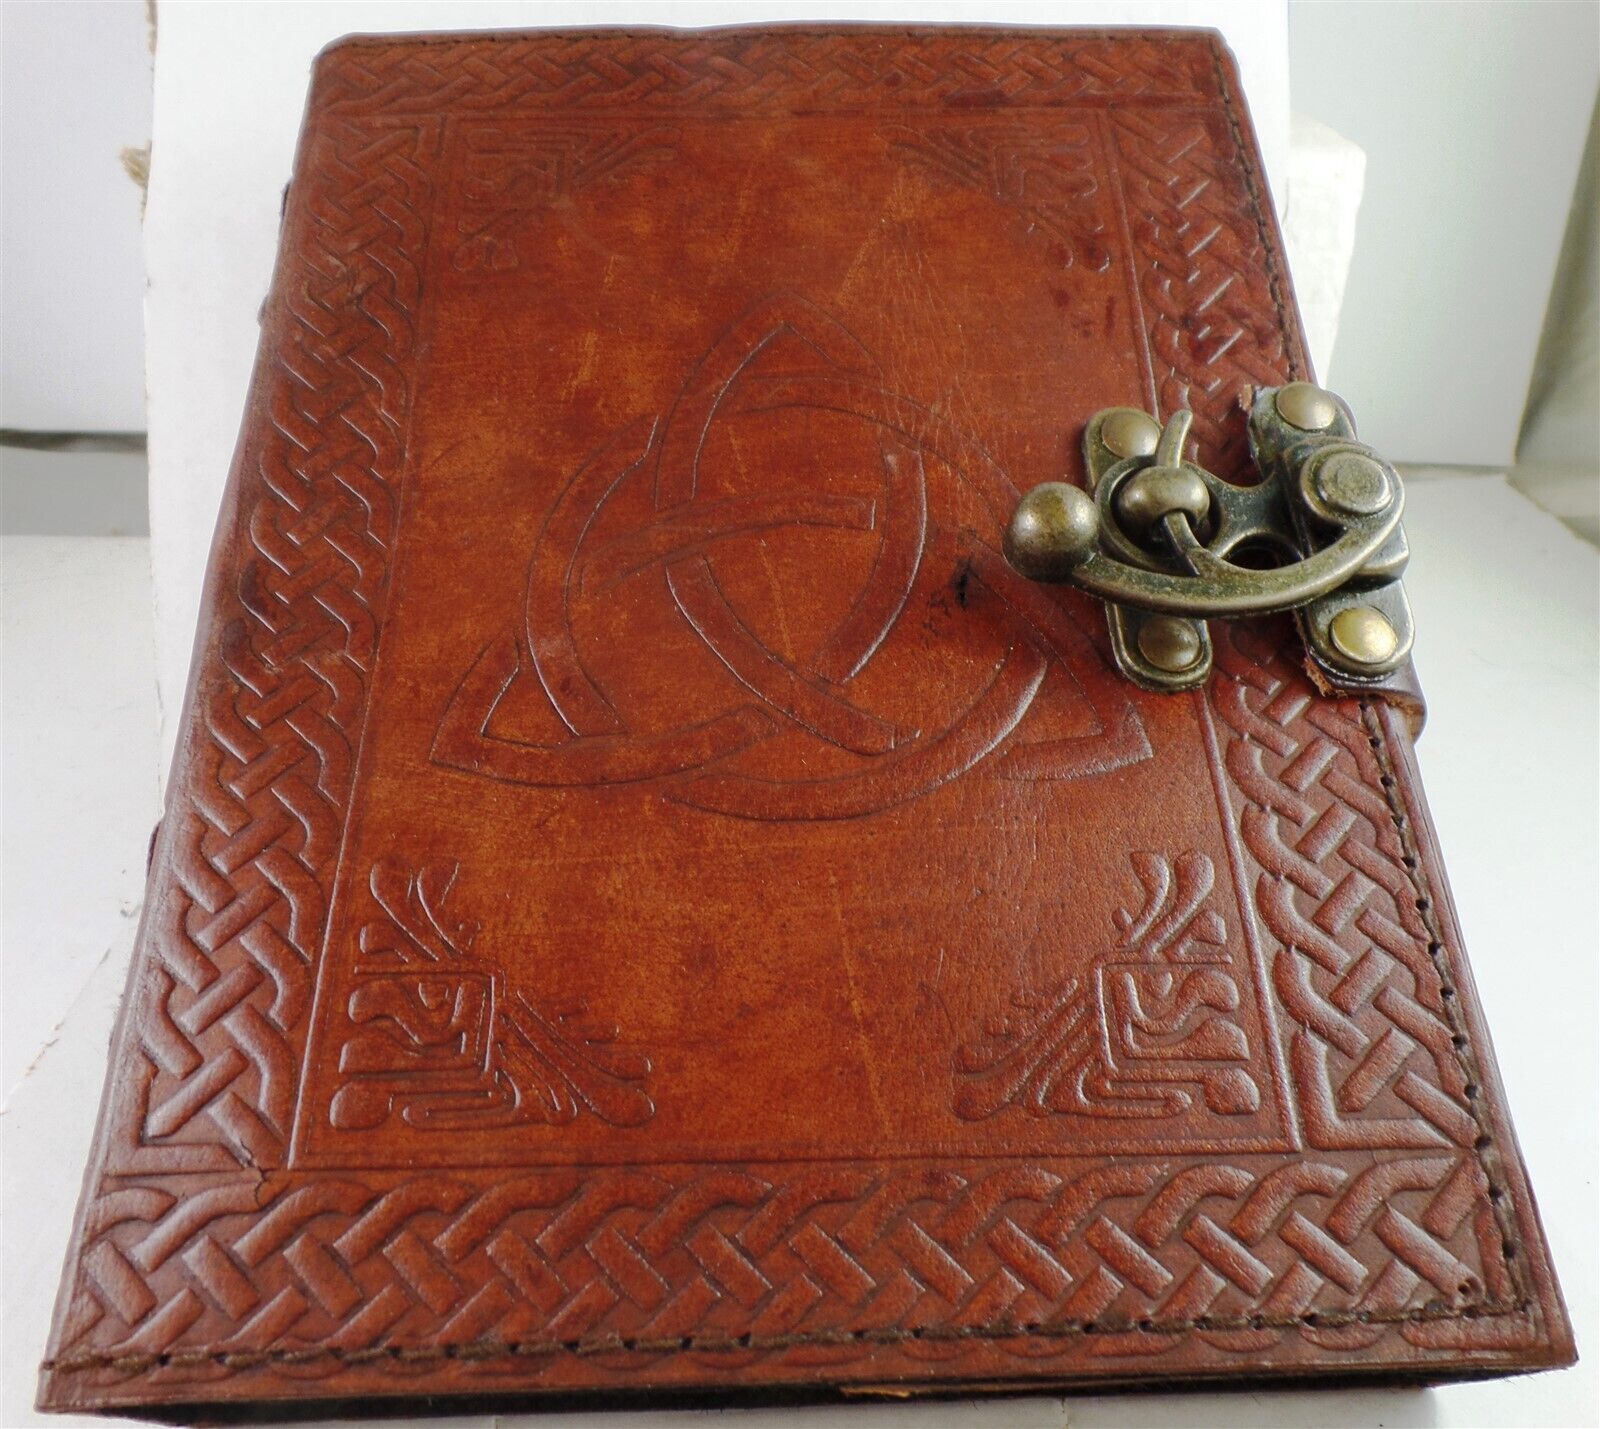 5x7 Leather Journal Celtic Triquetra Embossed Lock Clasp Wicca Pagan New